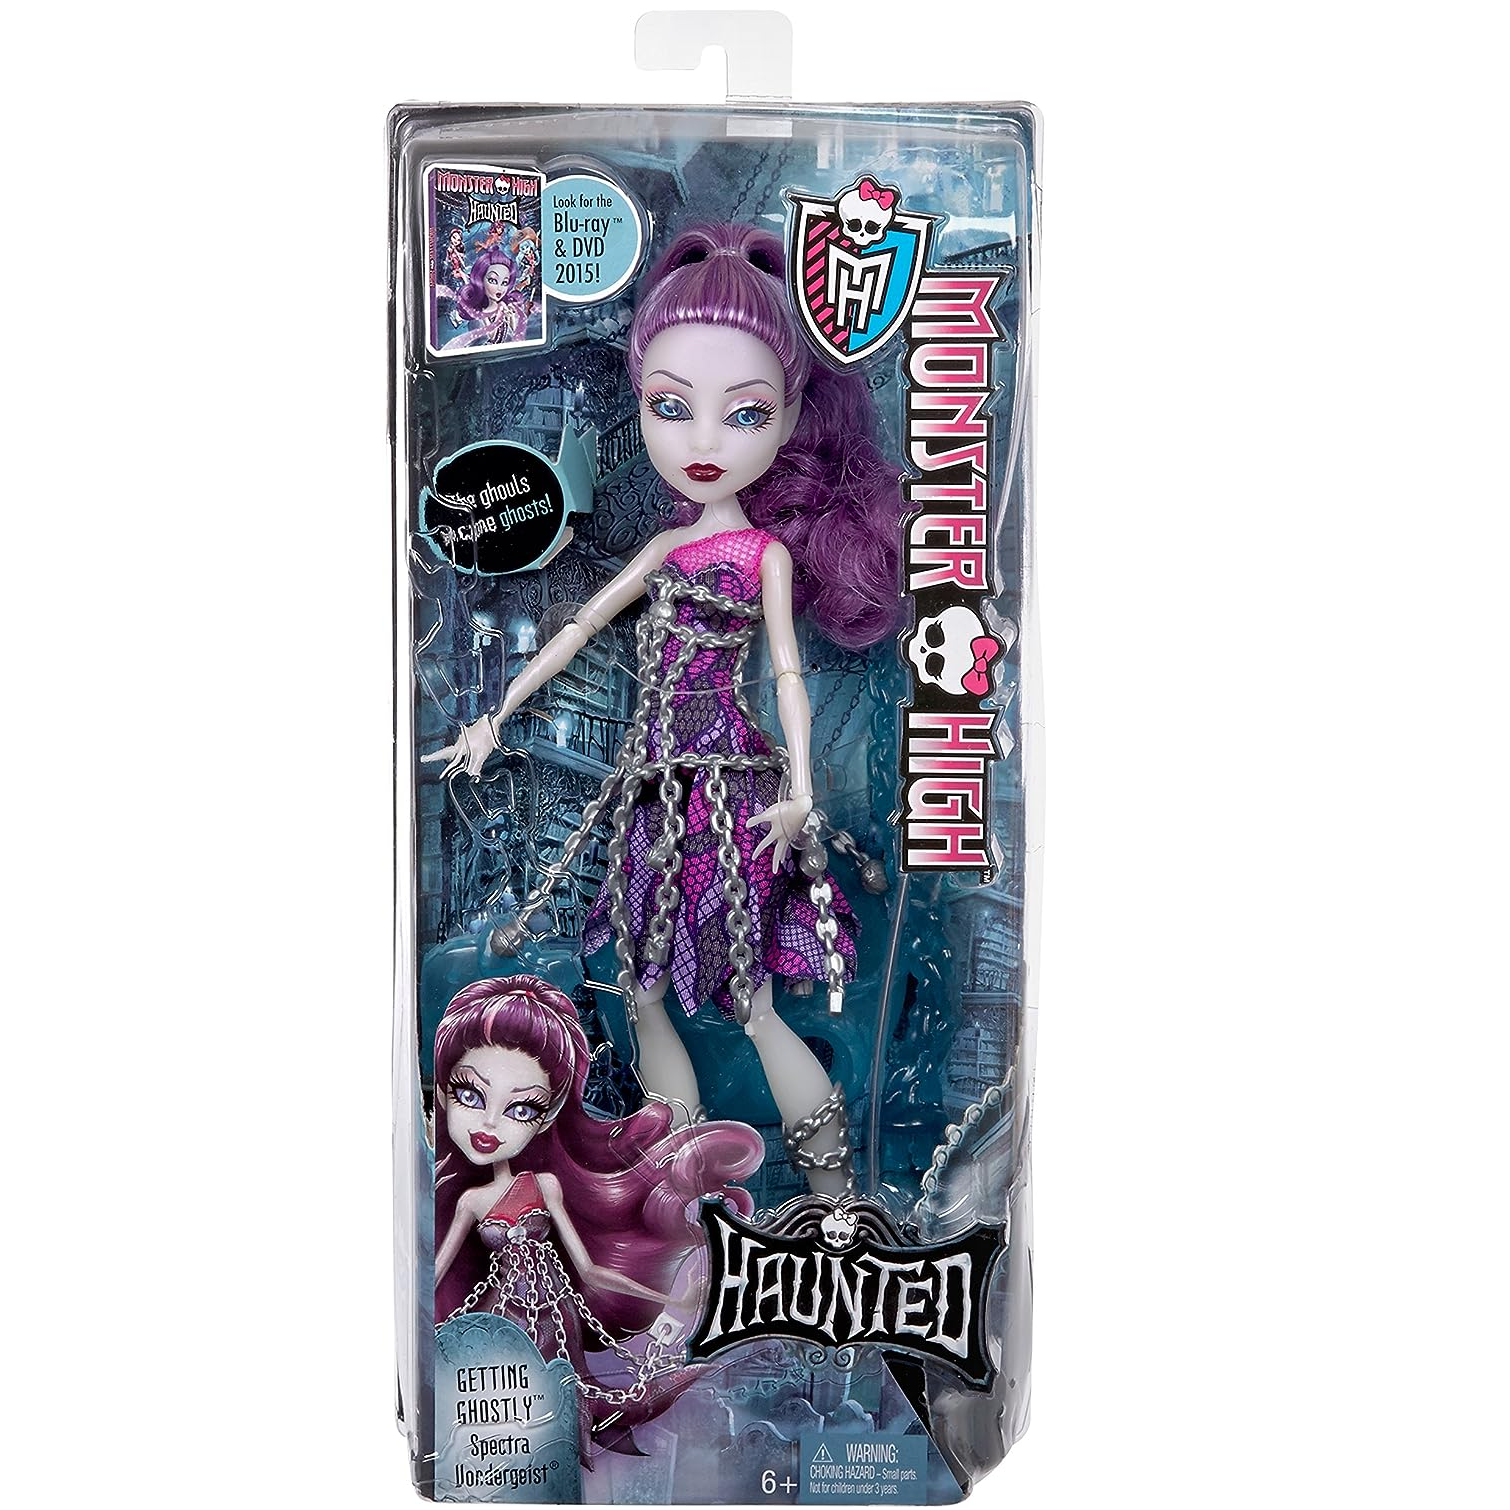 Monster High Generation 1 Haunted Getting Ghostly Spectra 